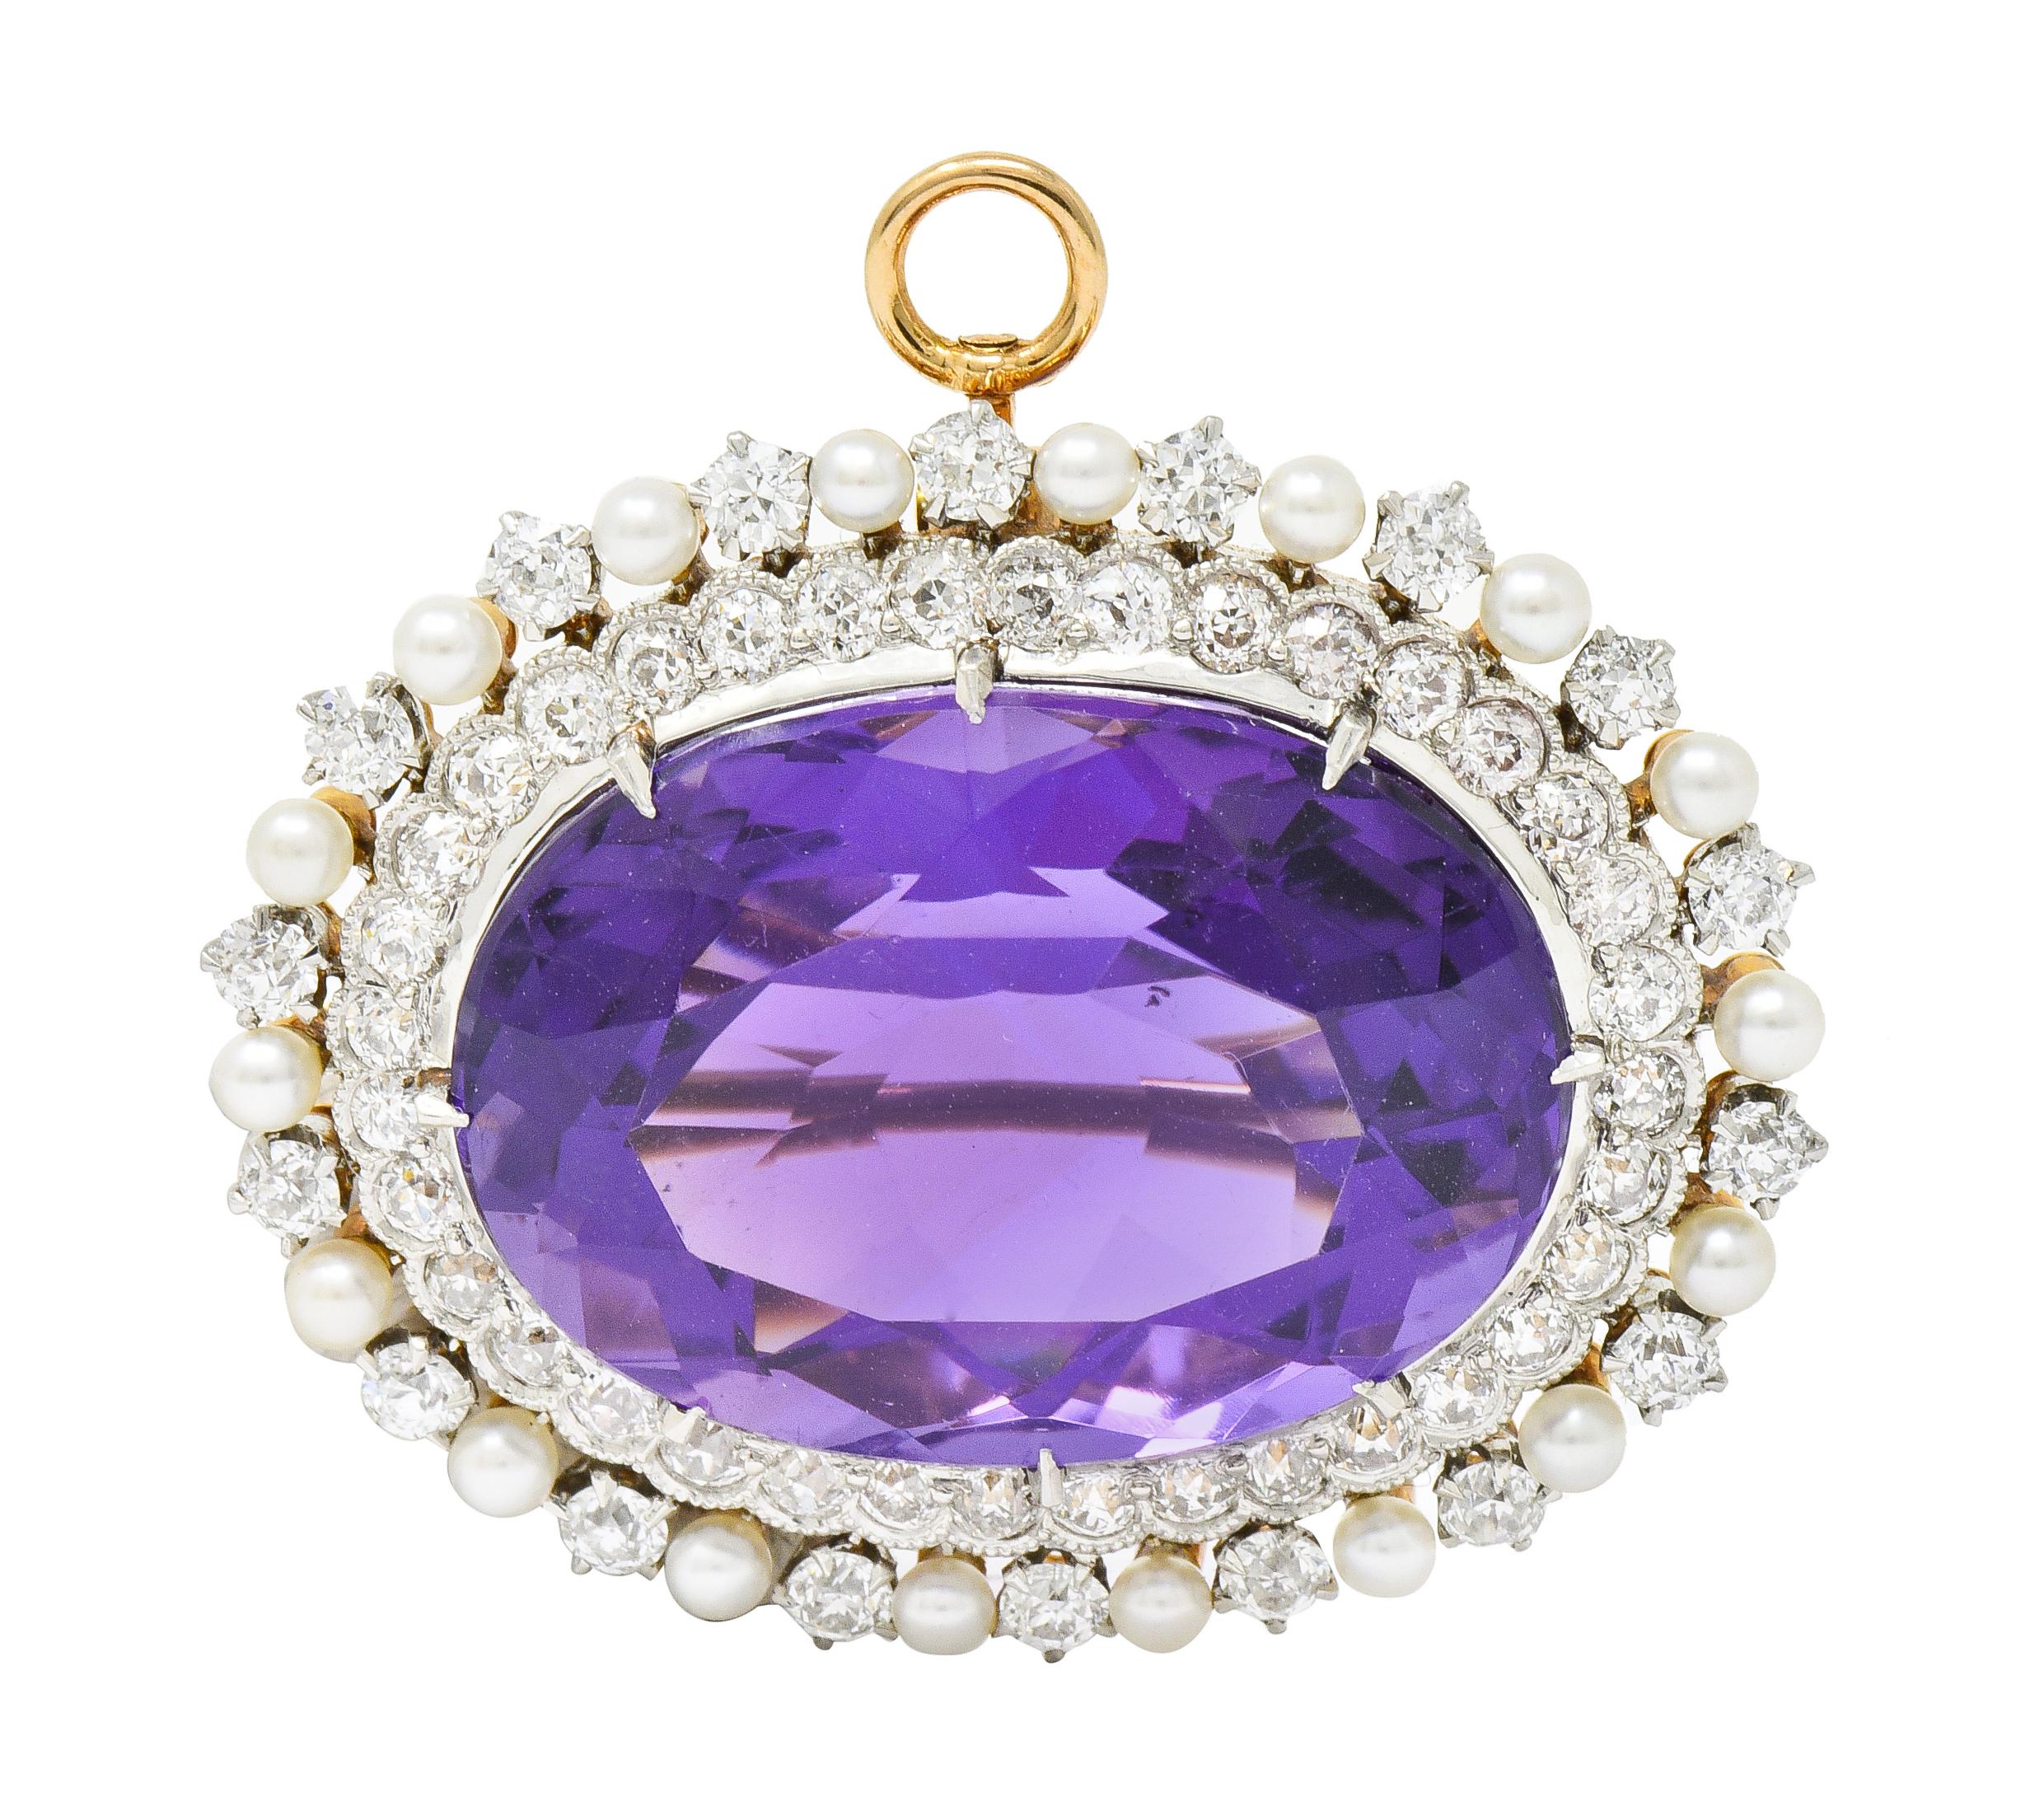 Centering an oval mixed cut amethyst weighing approximately 23.73 carats and exhibiting a rich purple color

Surrounded by a double halo featuring scalloped design and milgrain details

Set throughout by old European cut and transitional cut